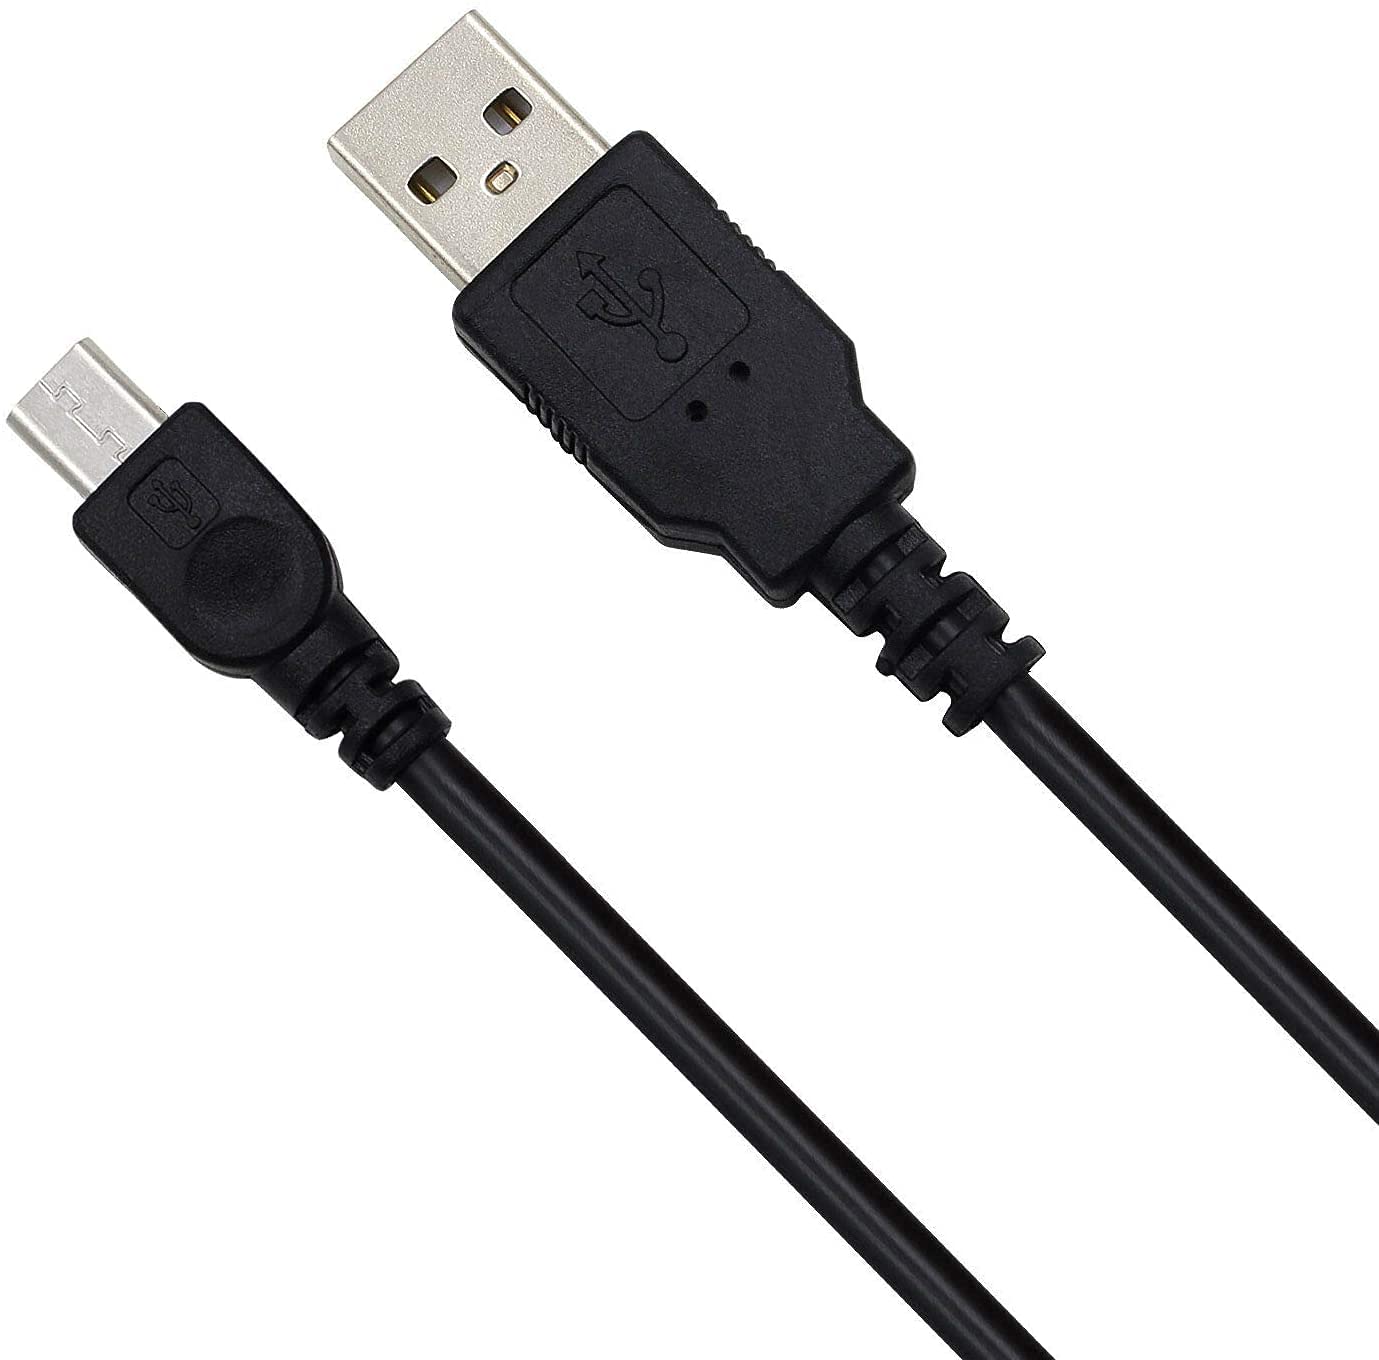 BestCH USB Sync Charging Cable Cord Wire for Sony Playstation 4 PS4 Controller Remote